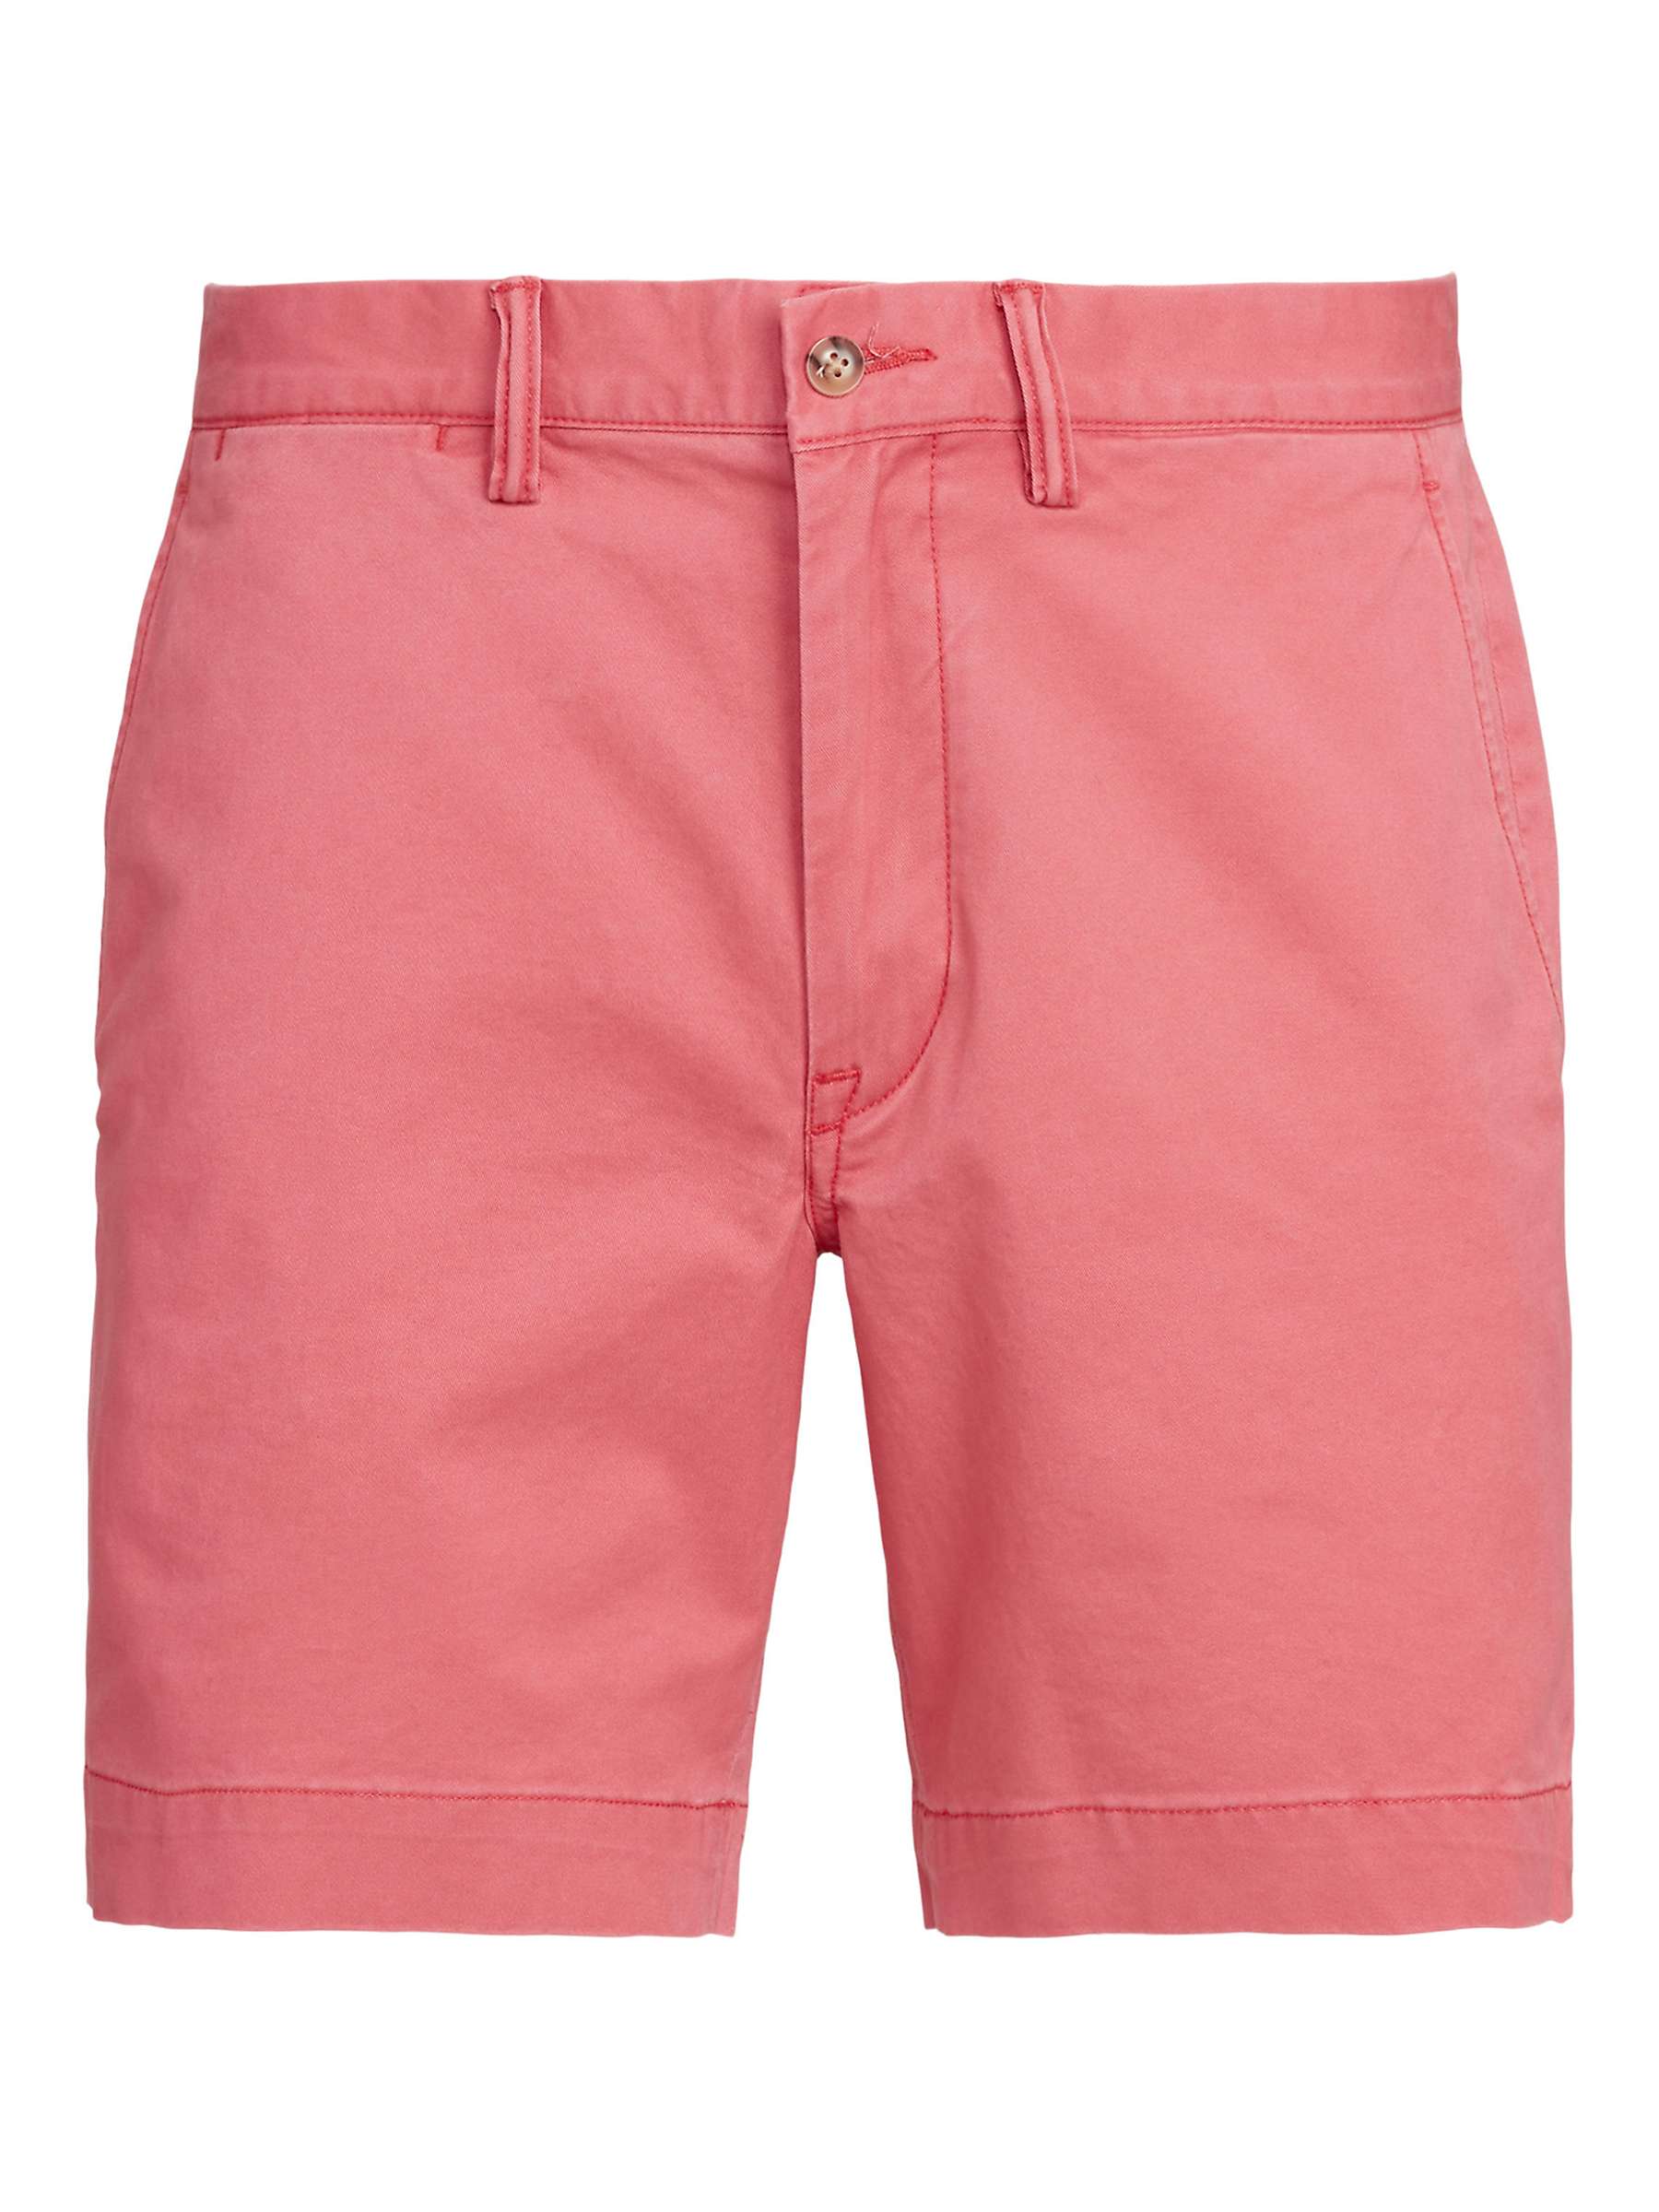 Ralph Lauren Stretch Straight Fit Chino Shorts, Nantucket Red at John ...